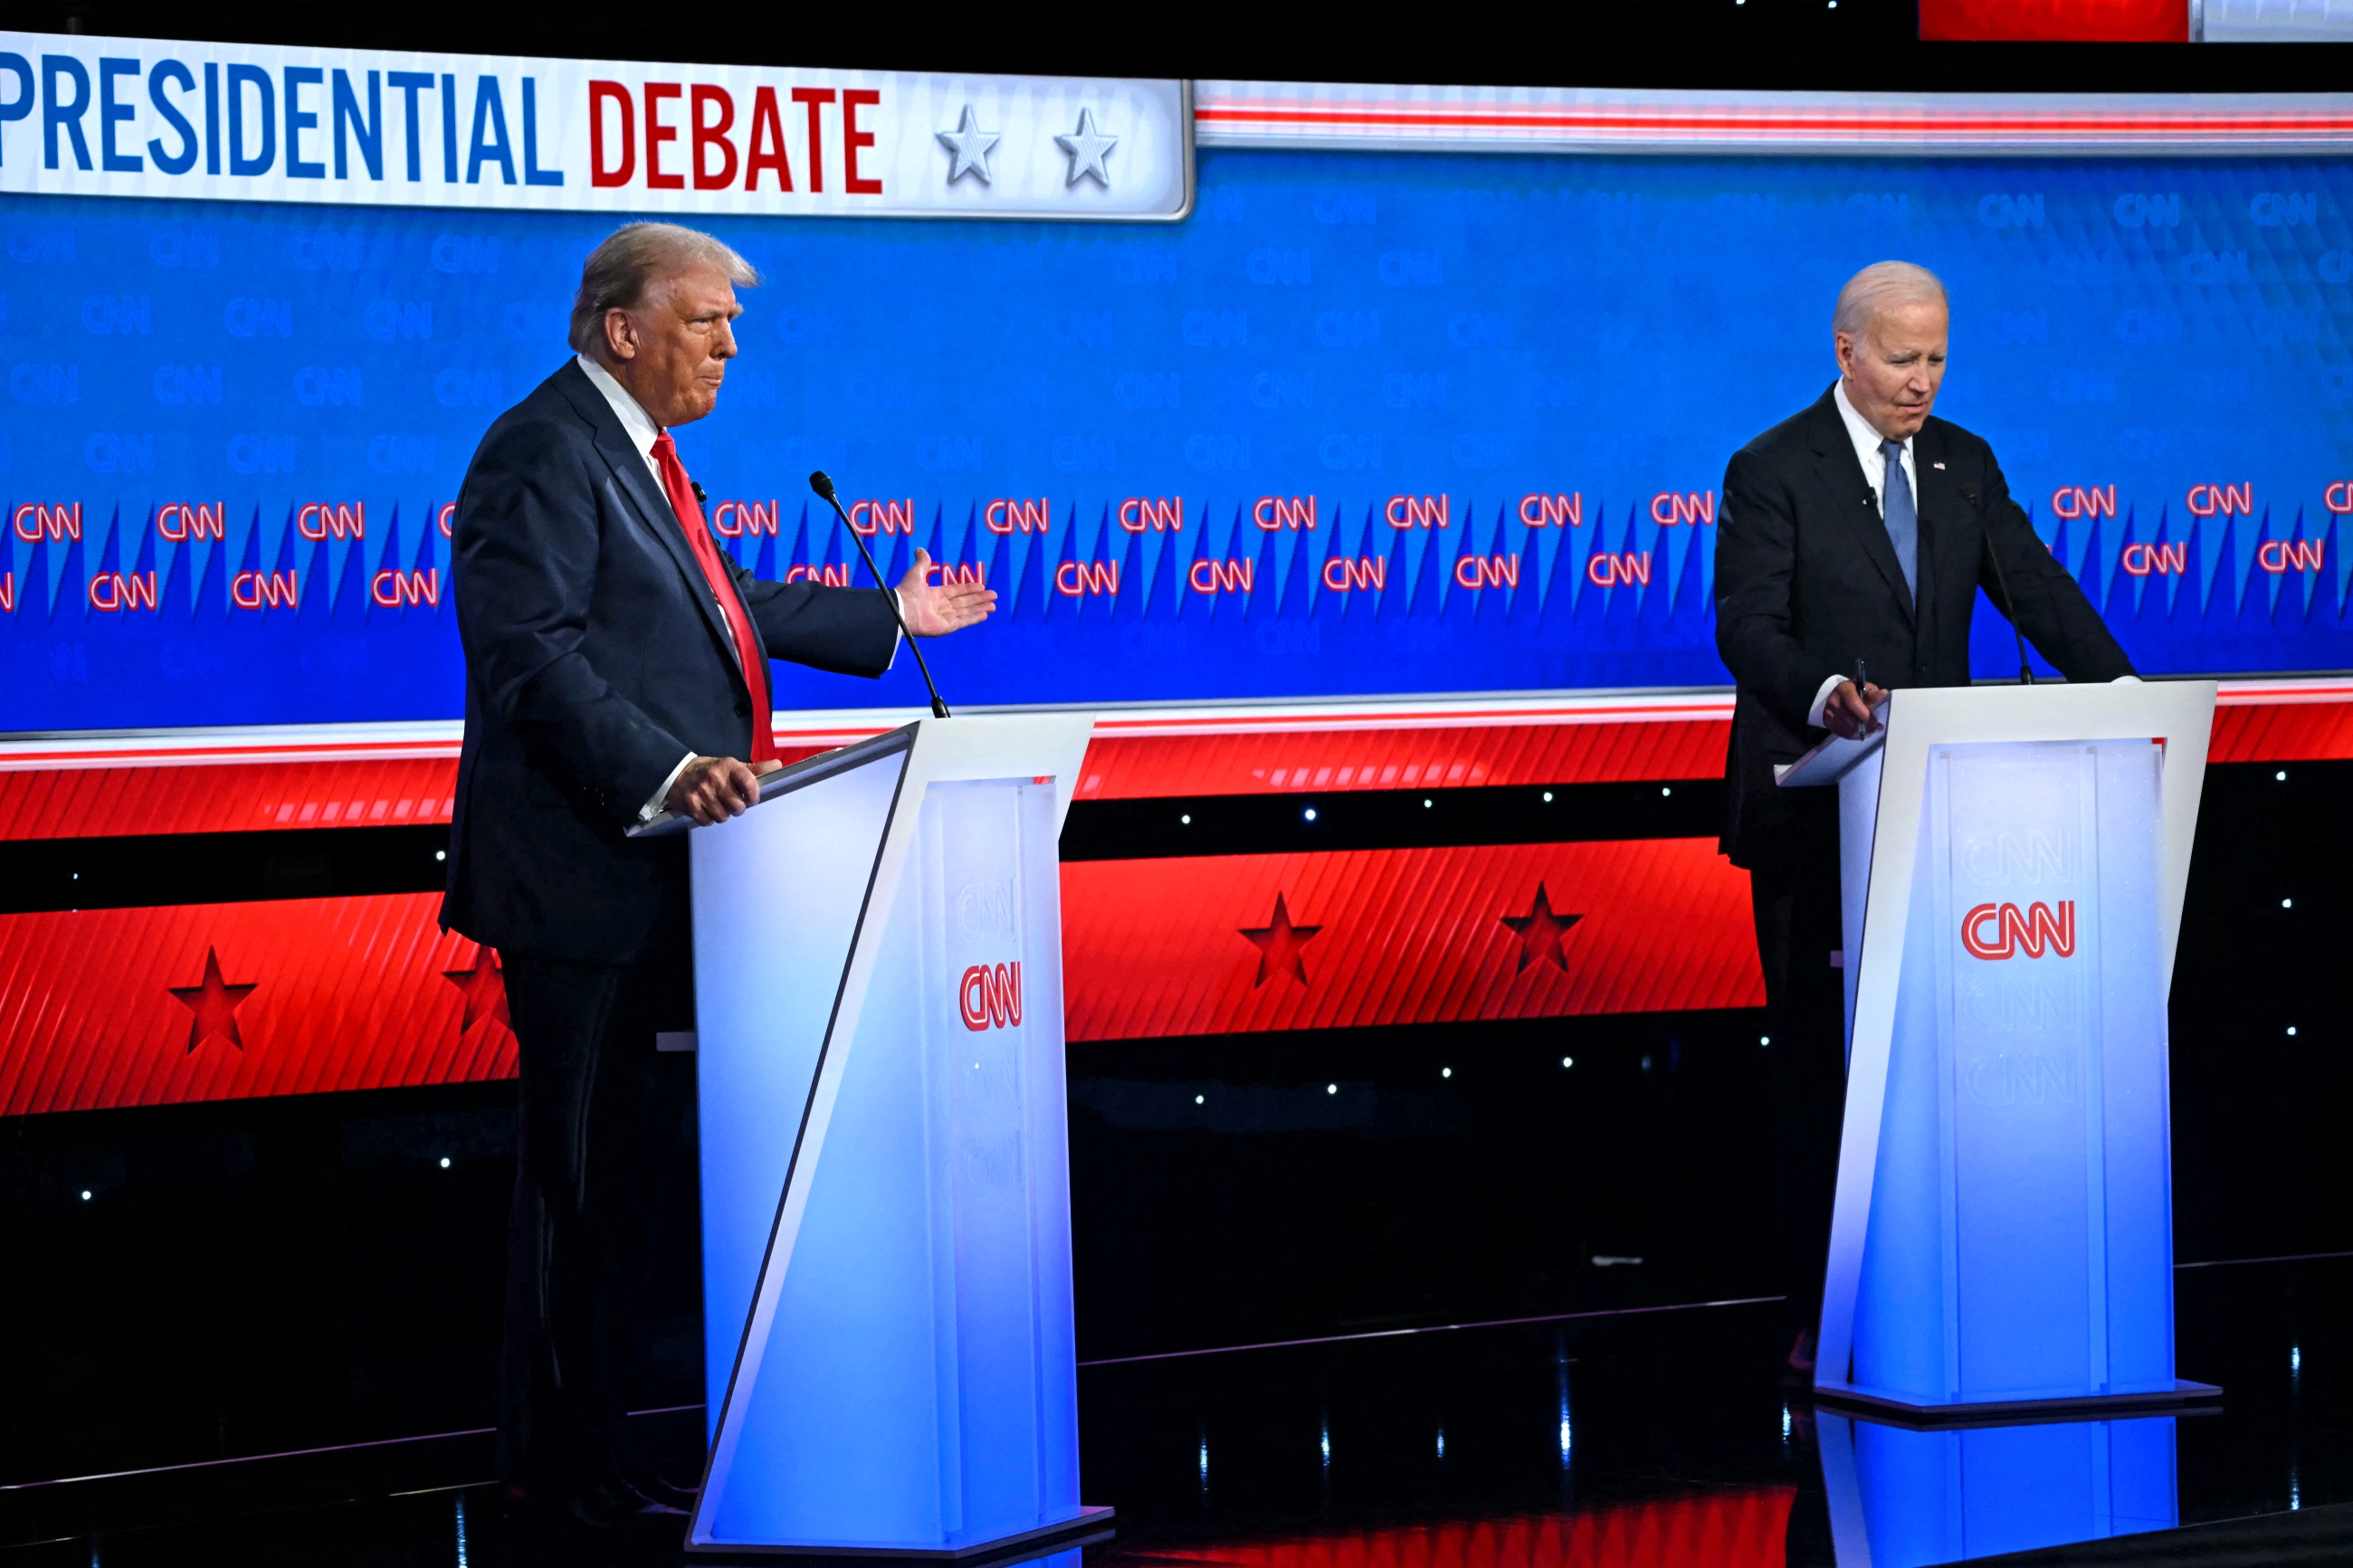 US President Joe Biden and former US President Donald Trump participate in the first presidential debate of the 2024 elections at CNN's studios in Atlanta (Andrew Caballero-Reynolds/AFP).